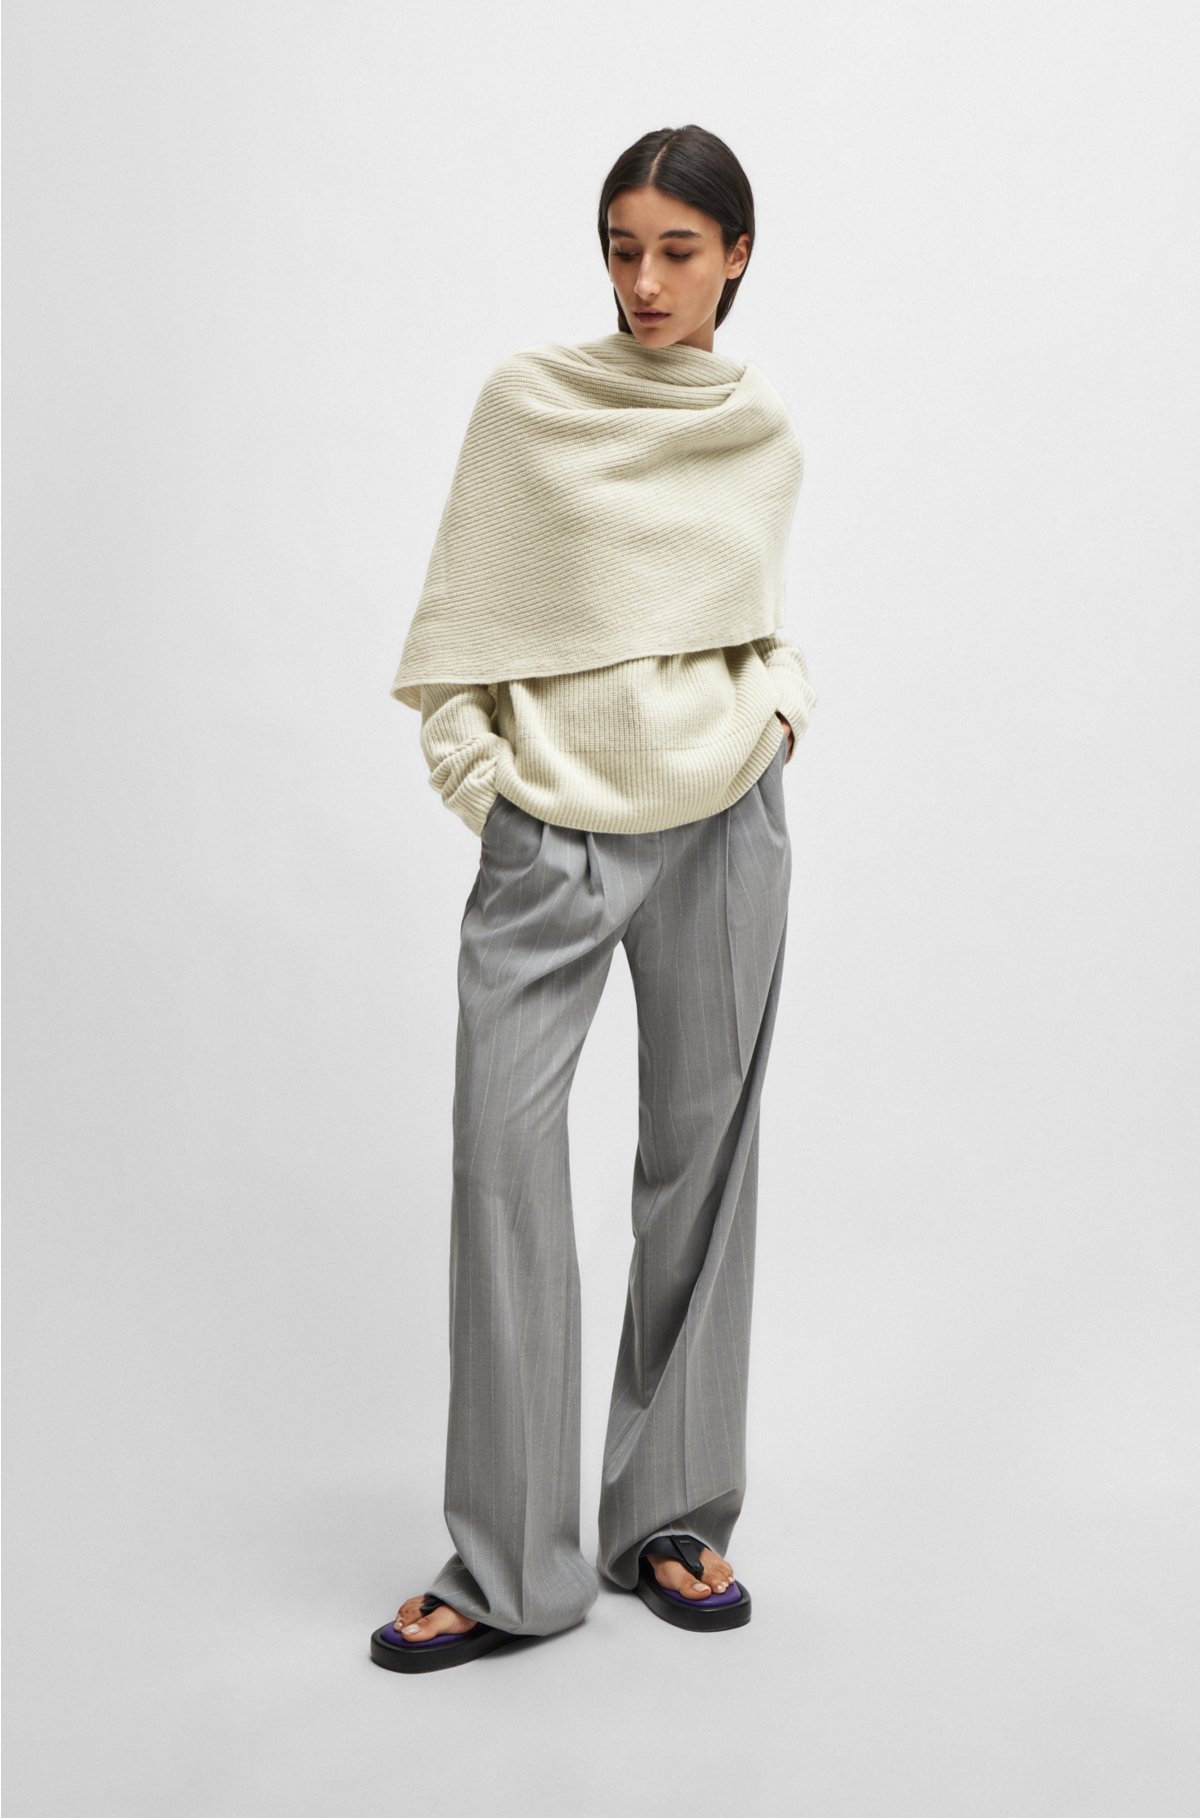 NAOMI x BOSS drape-detail sweater in wool and cashmere, White